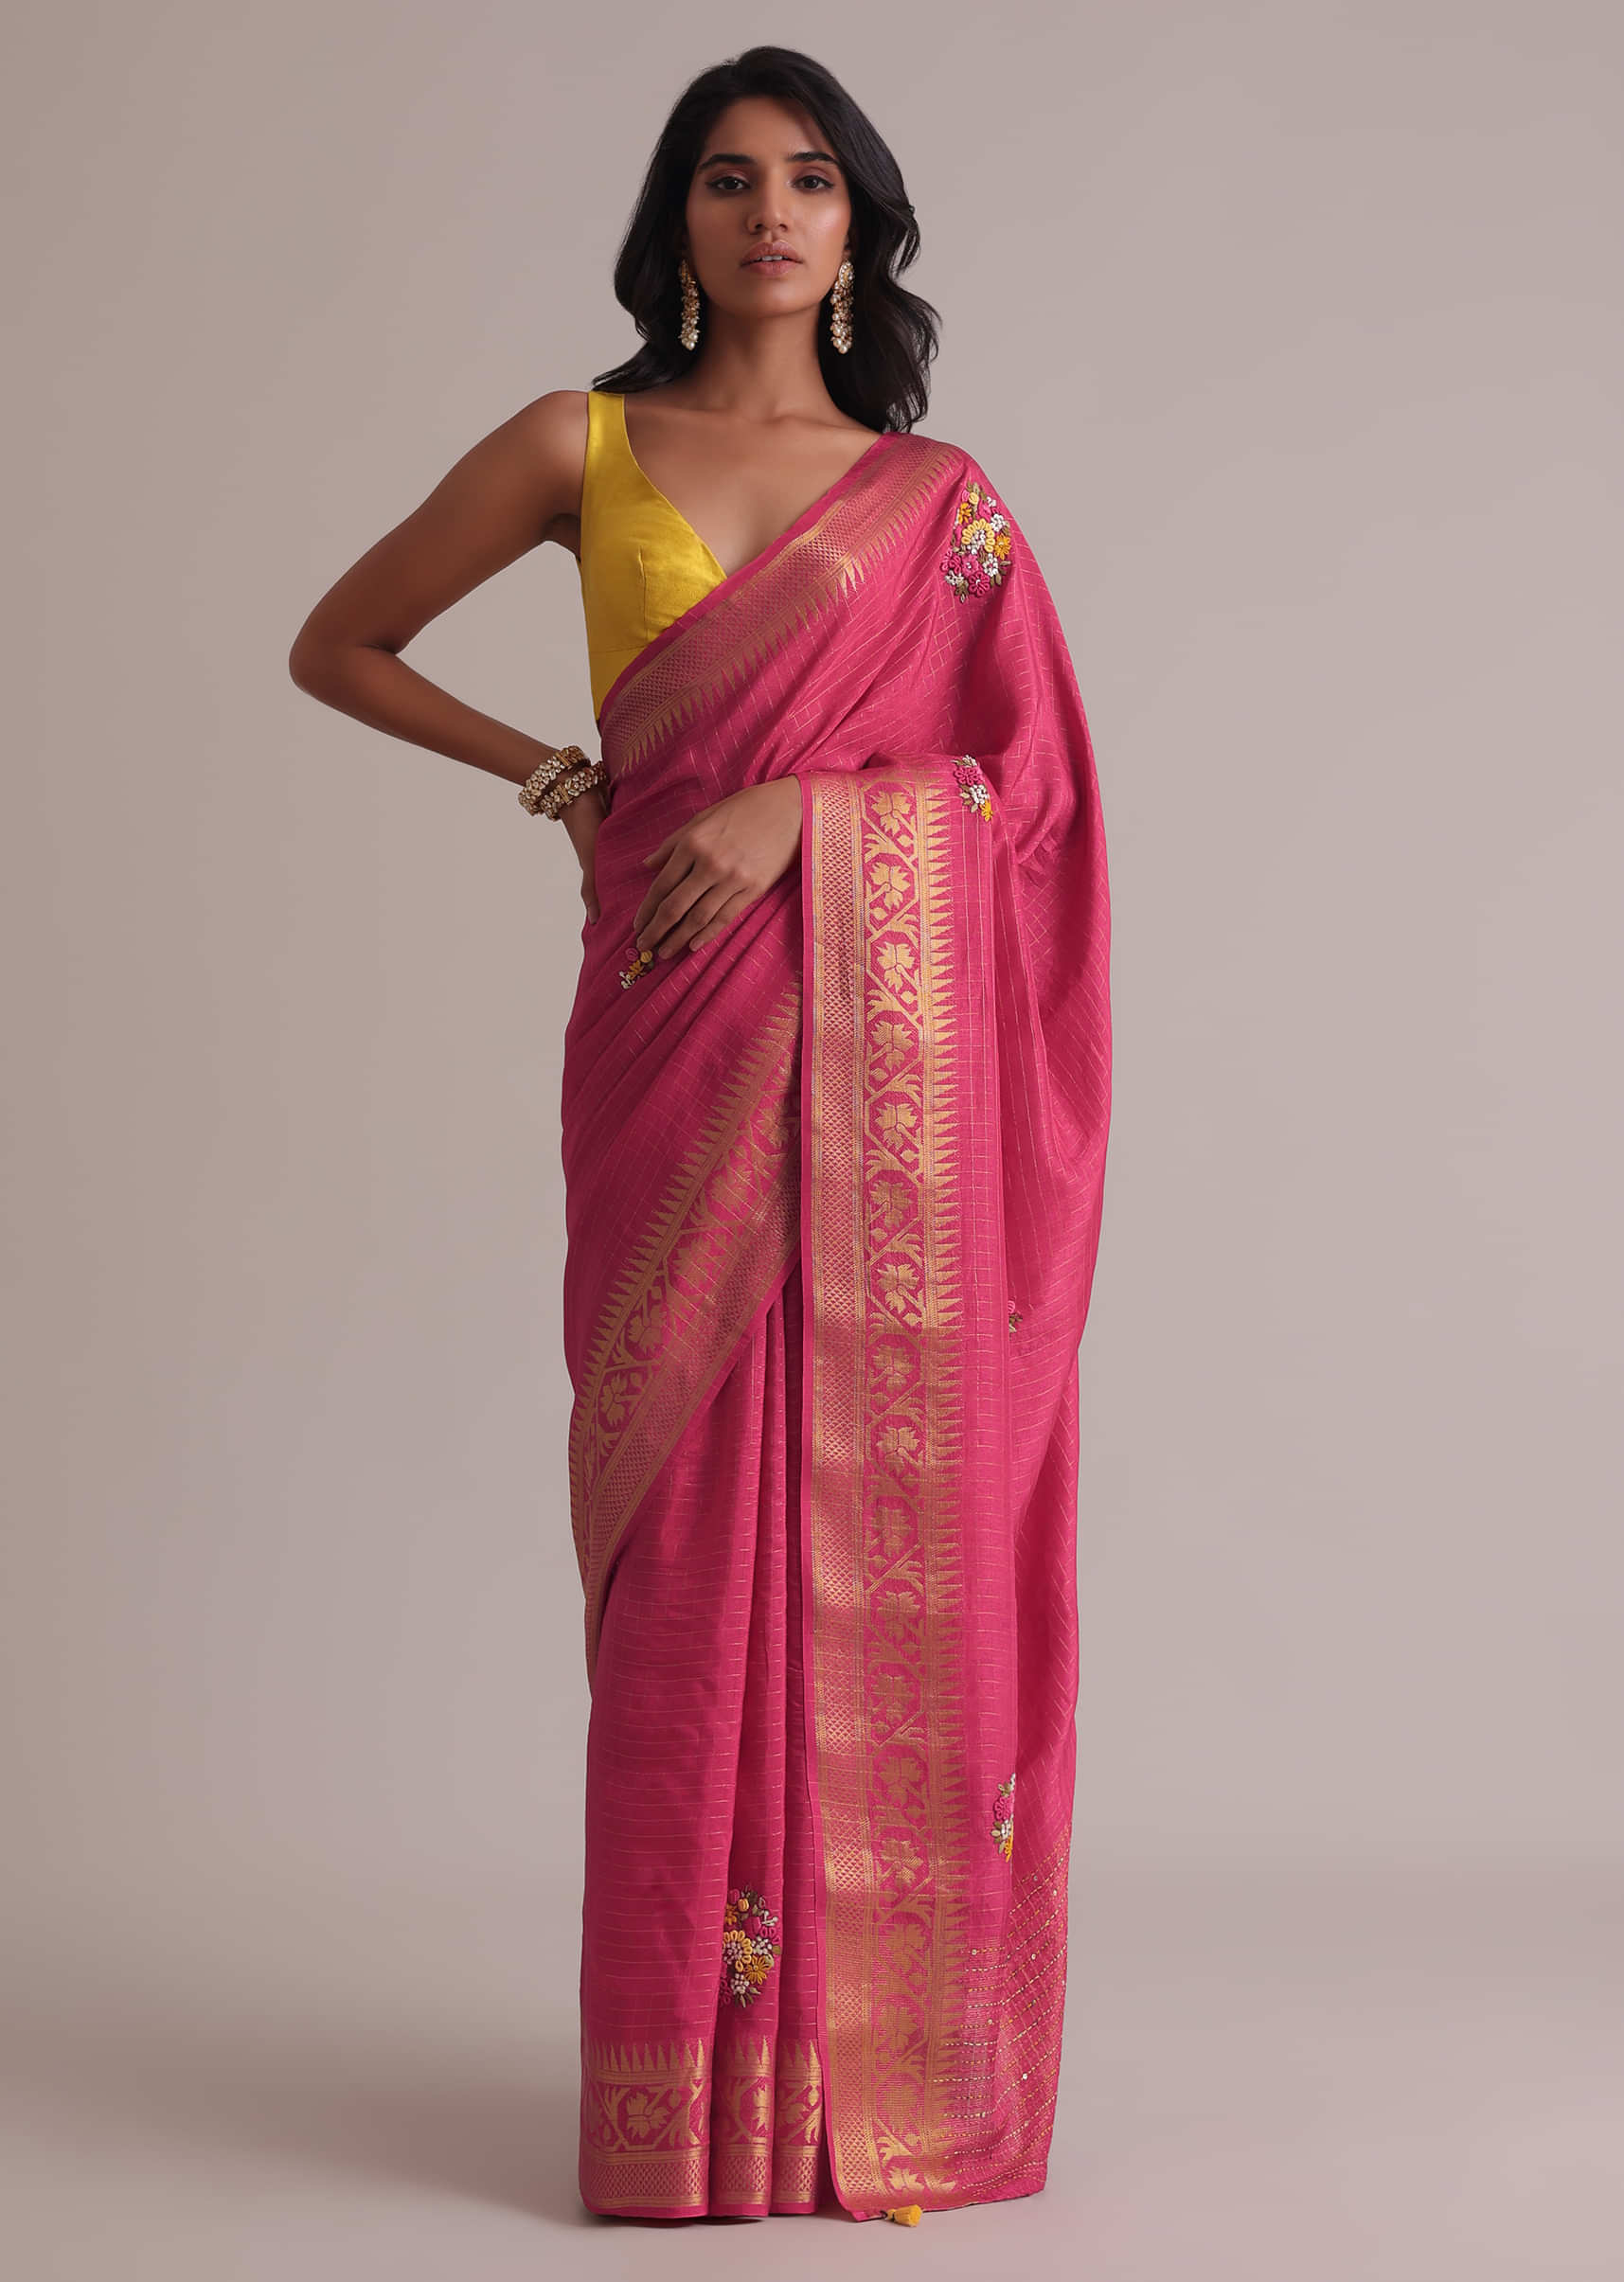 Coral Pink Saree In Georgette Tussar With Brocade, Zari, And Resham 3D Bud Embroidery